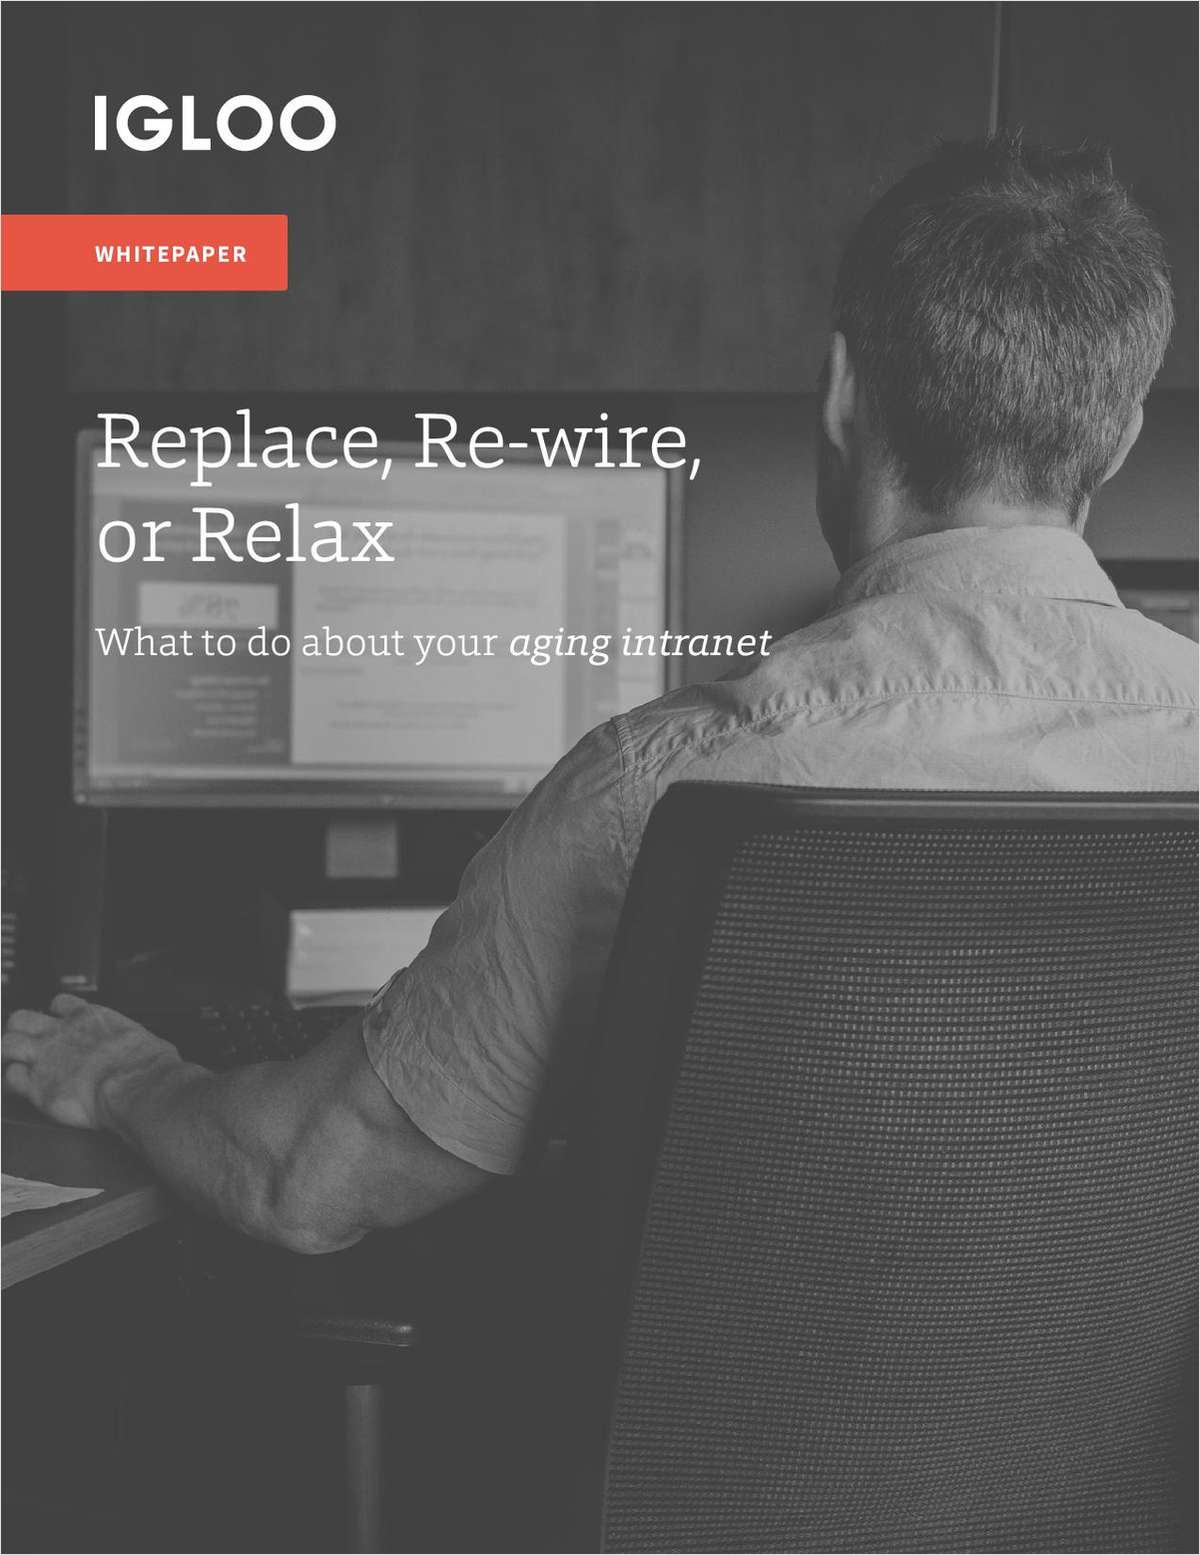 Replace, Re-wire, or Relax